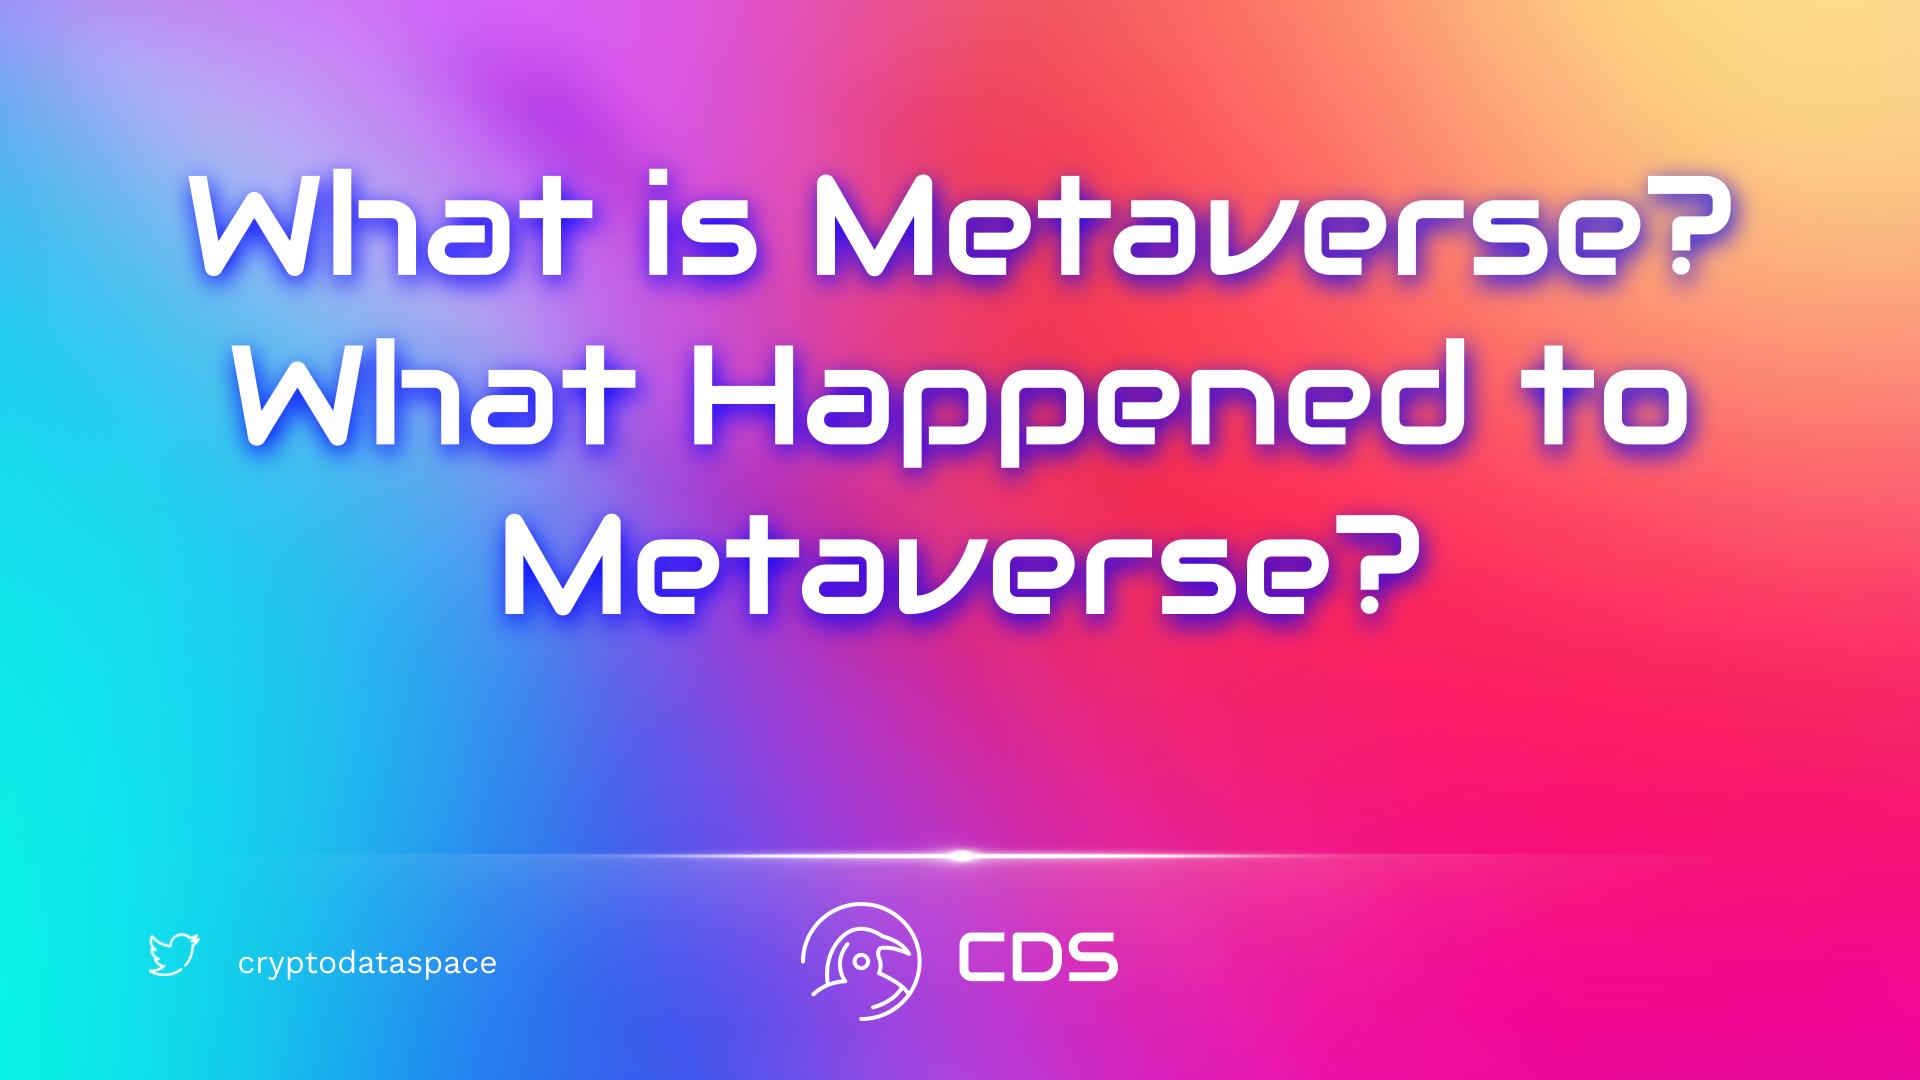 What is Metaverse? What Happened to Metaverse?